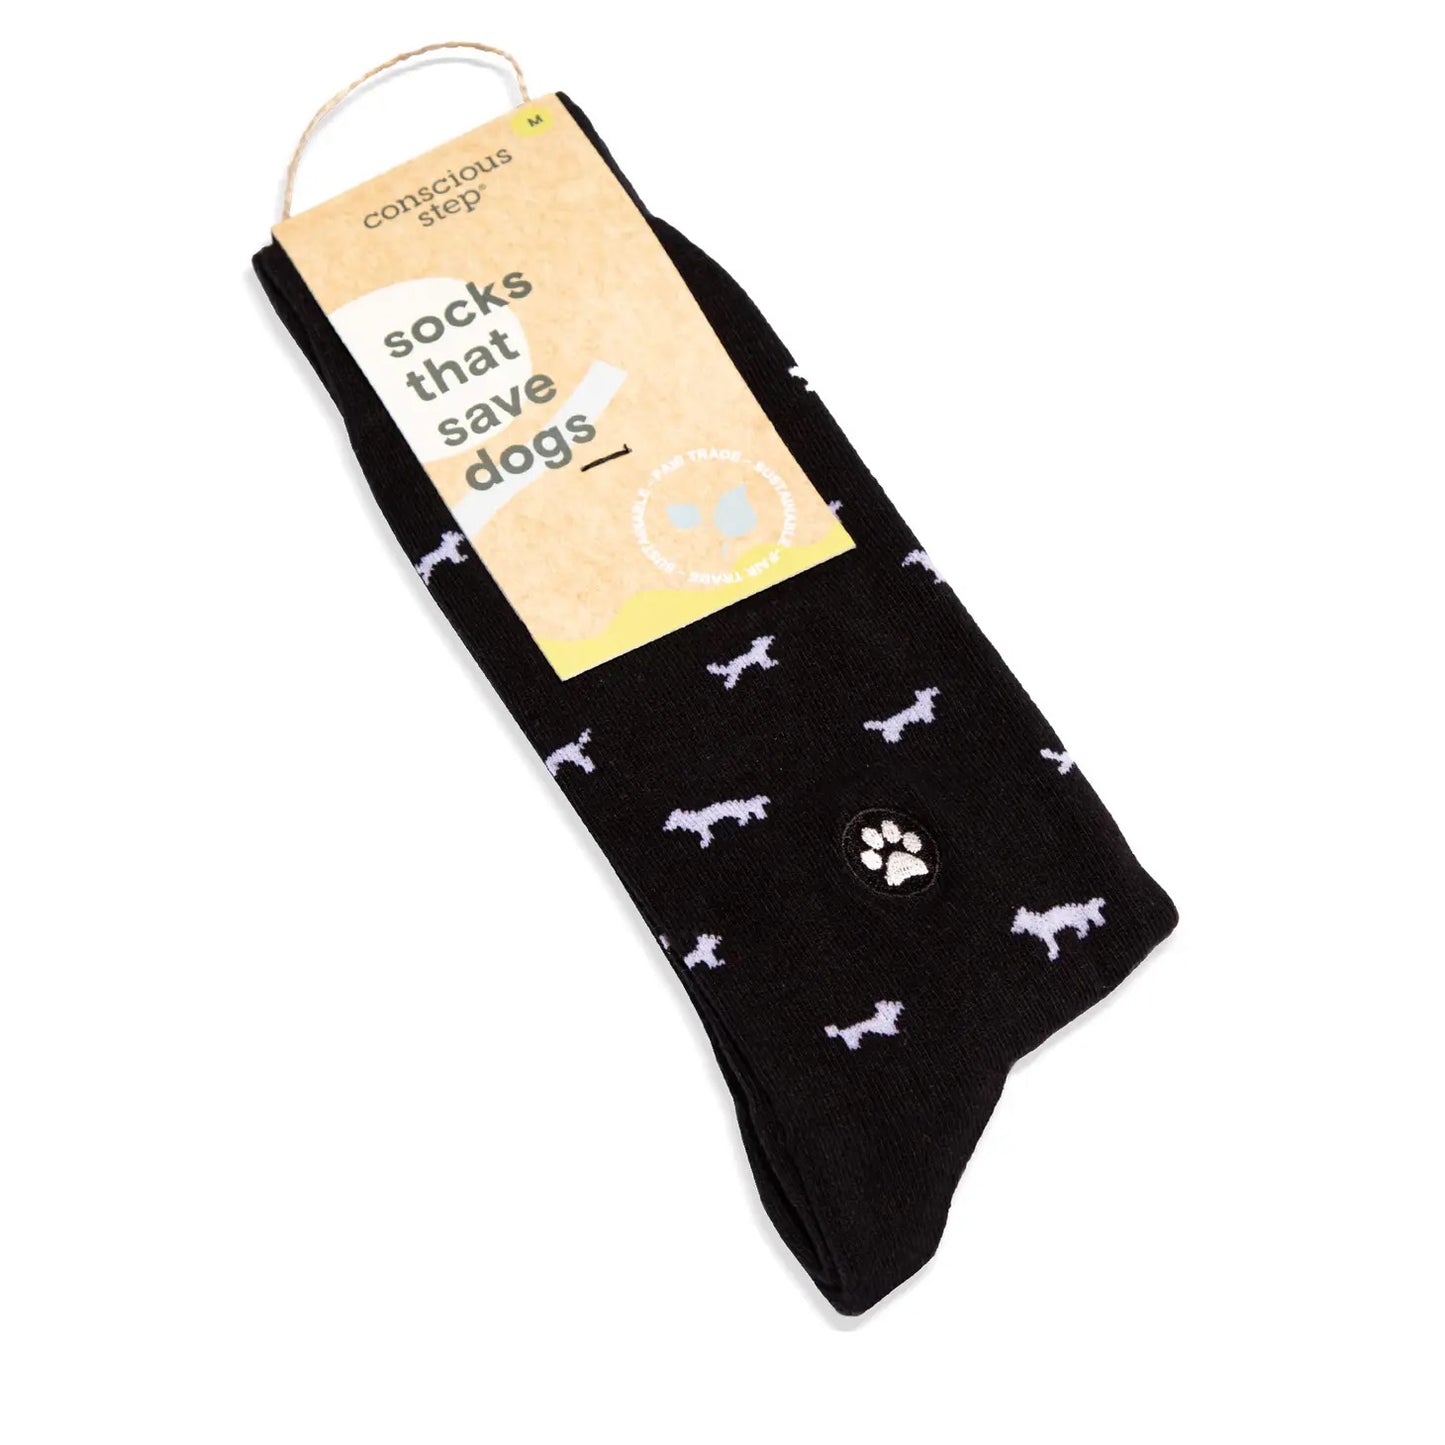 Conscious Step, Socks that Save Dogs - Dog Lovers - Boutique Dandelion